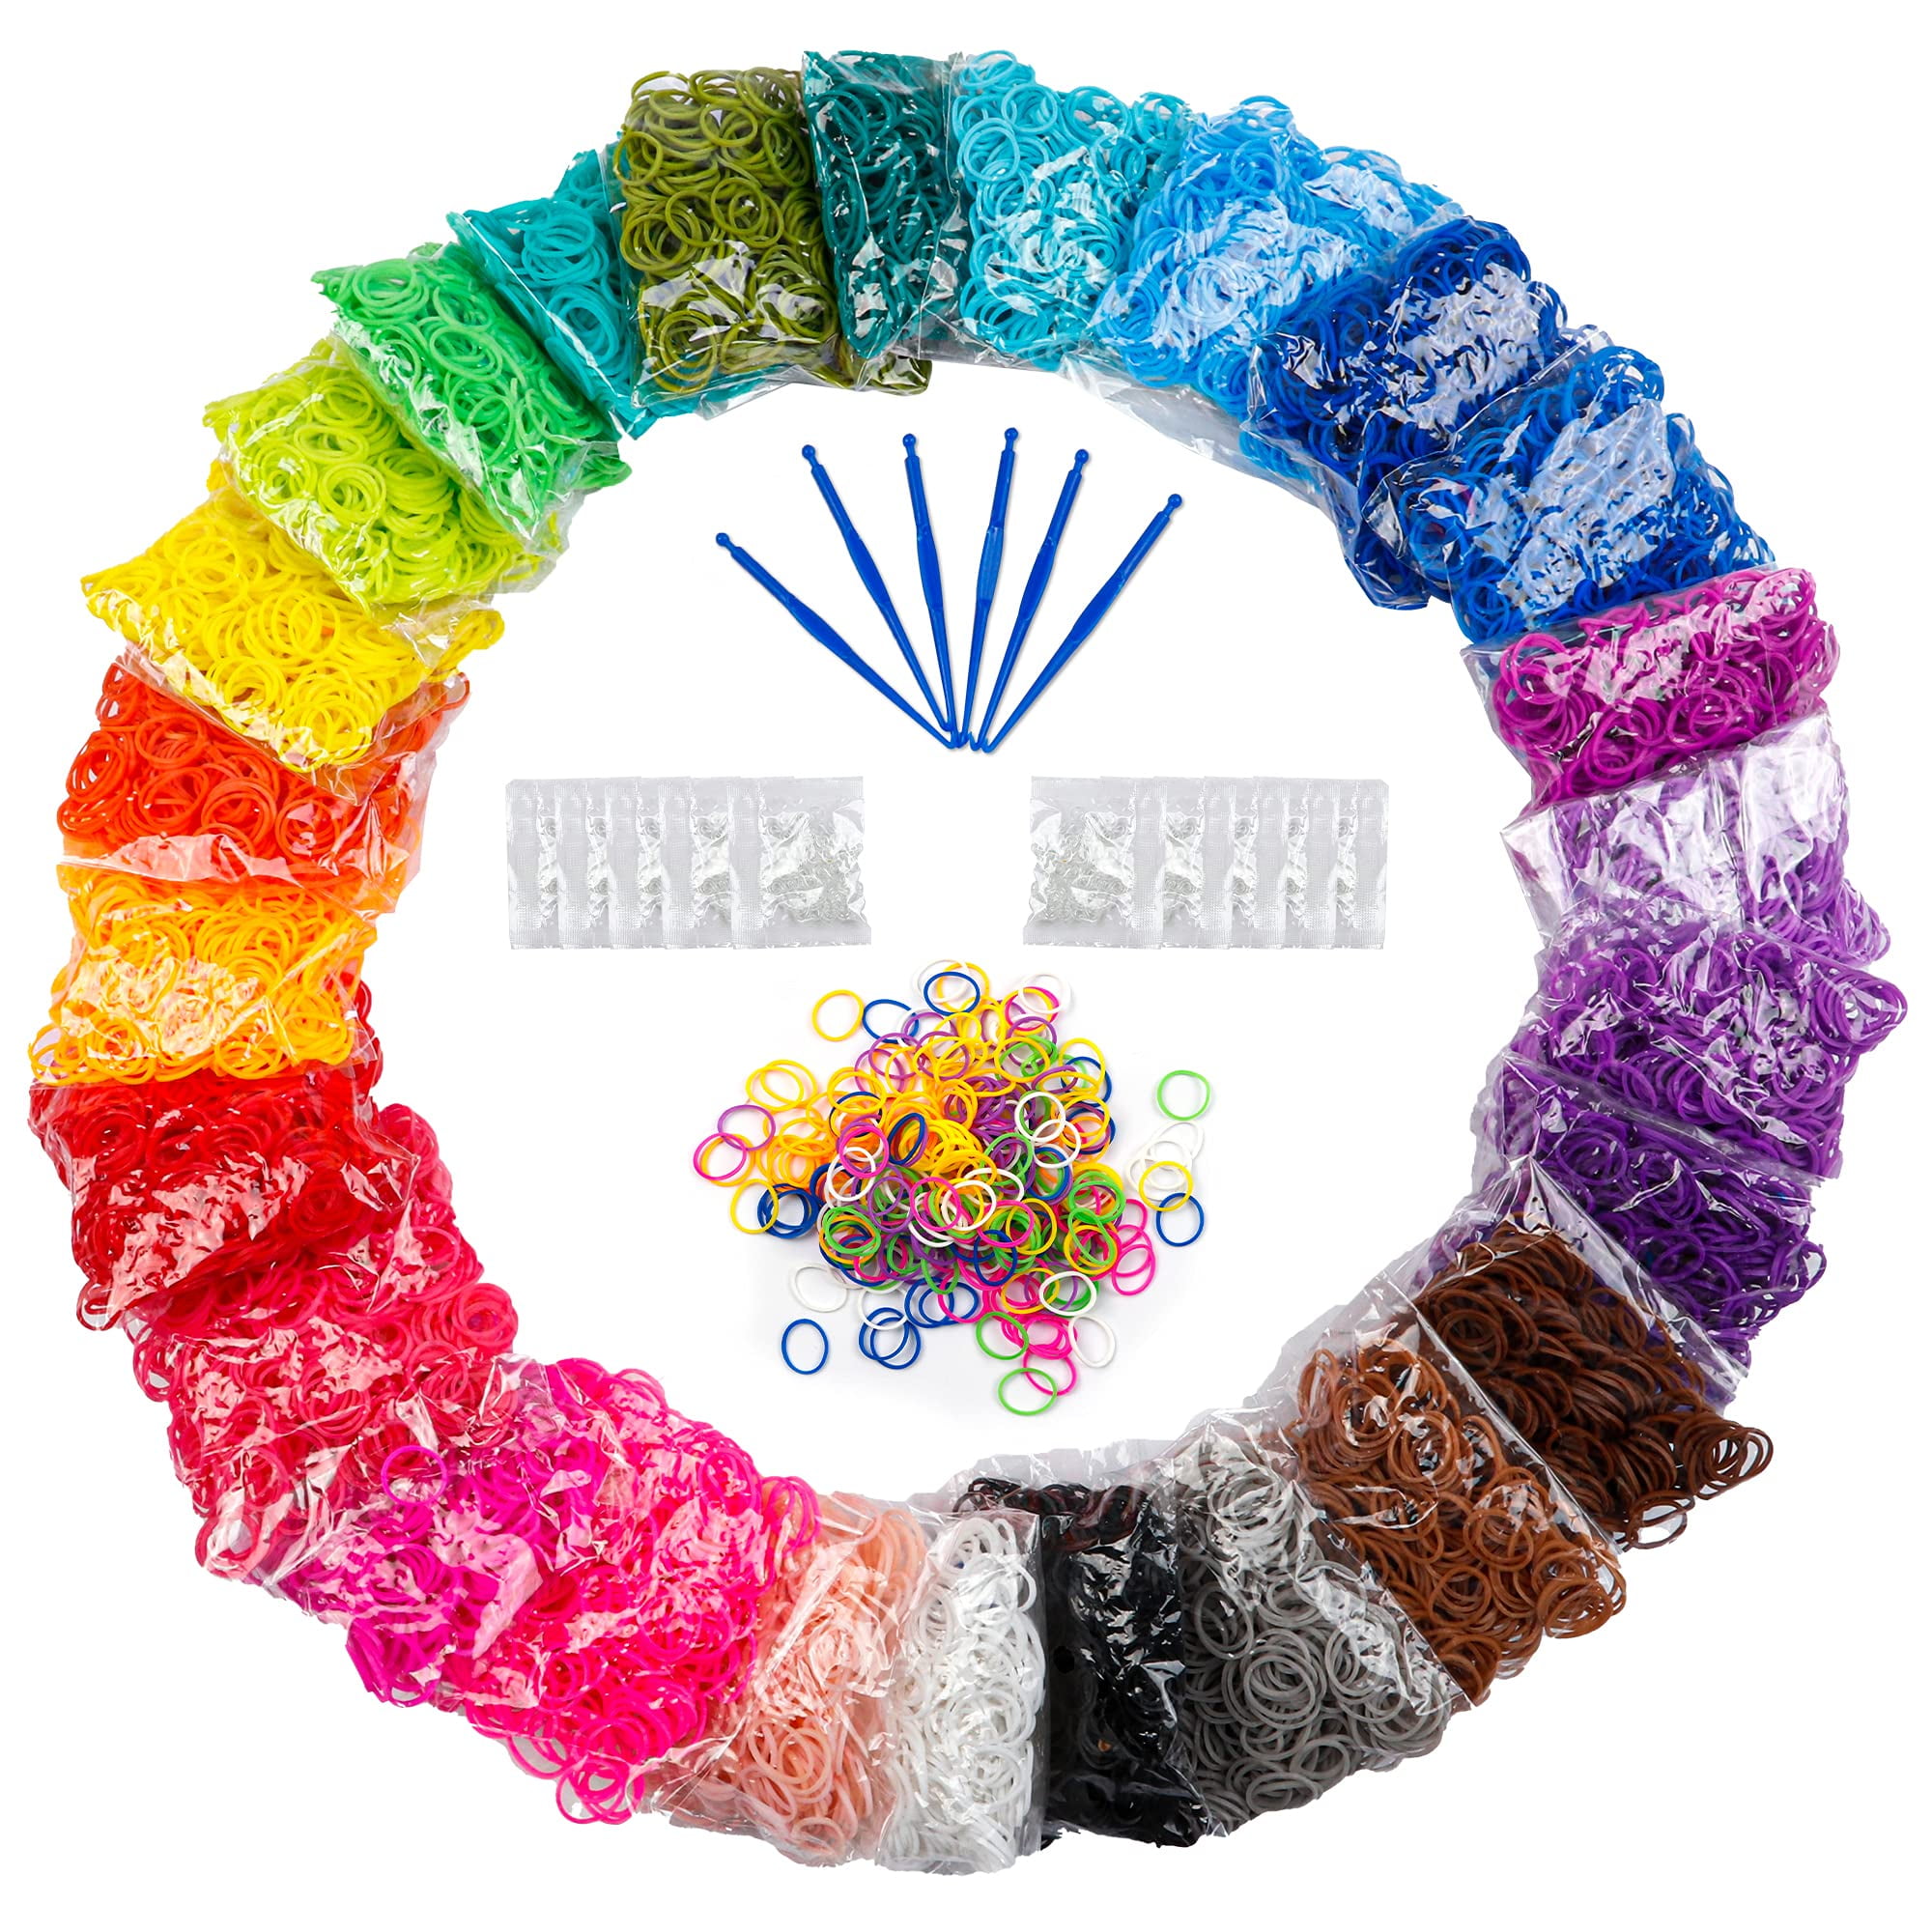 11,900+ Rubber Band Bracelet Refill Kit - 11,000 Premium Loom Bands in 28  Bright Colors, 600 S-Clips, 200 Beads, 30 Charms, 52 ABC Beads - Loom  Bracelet Making Kit in a Huge Giftable Case